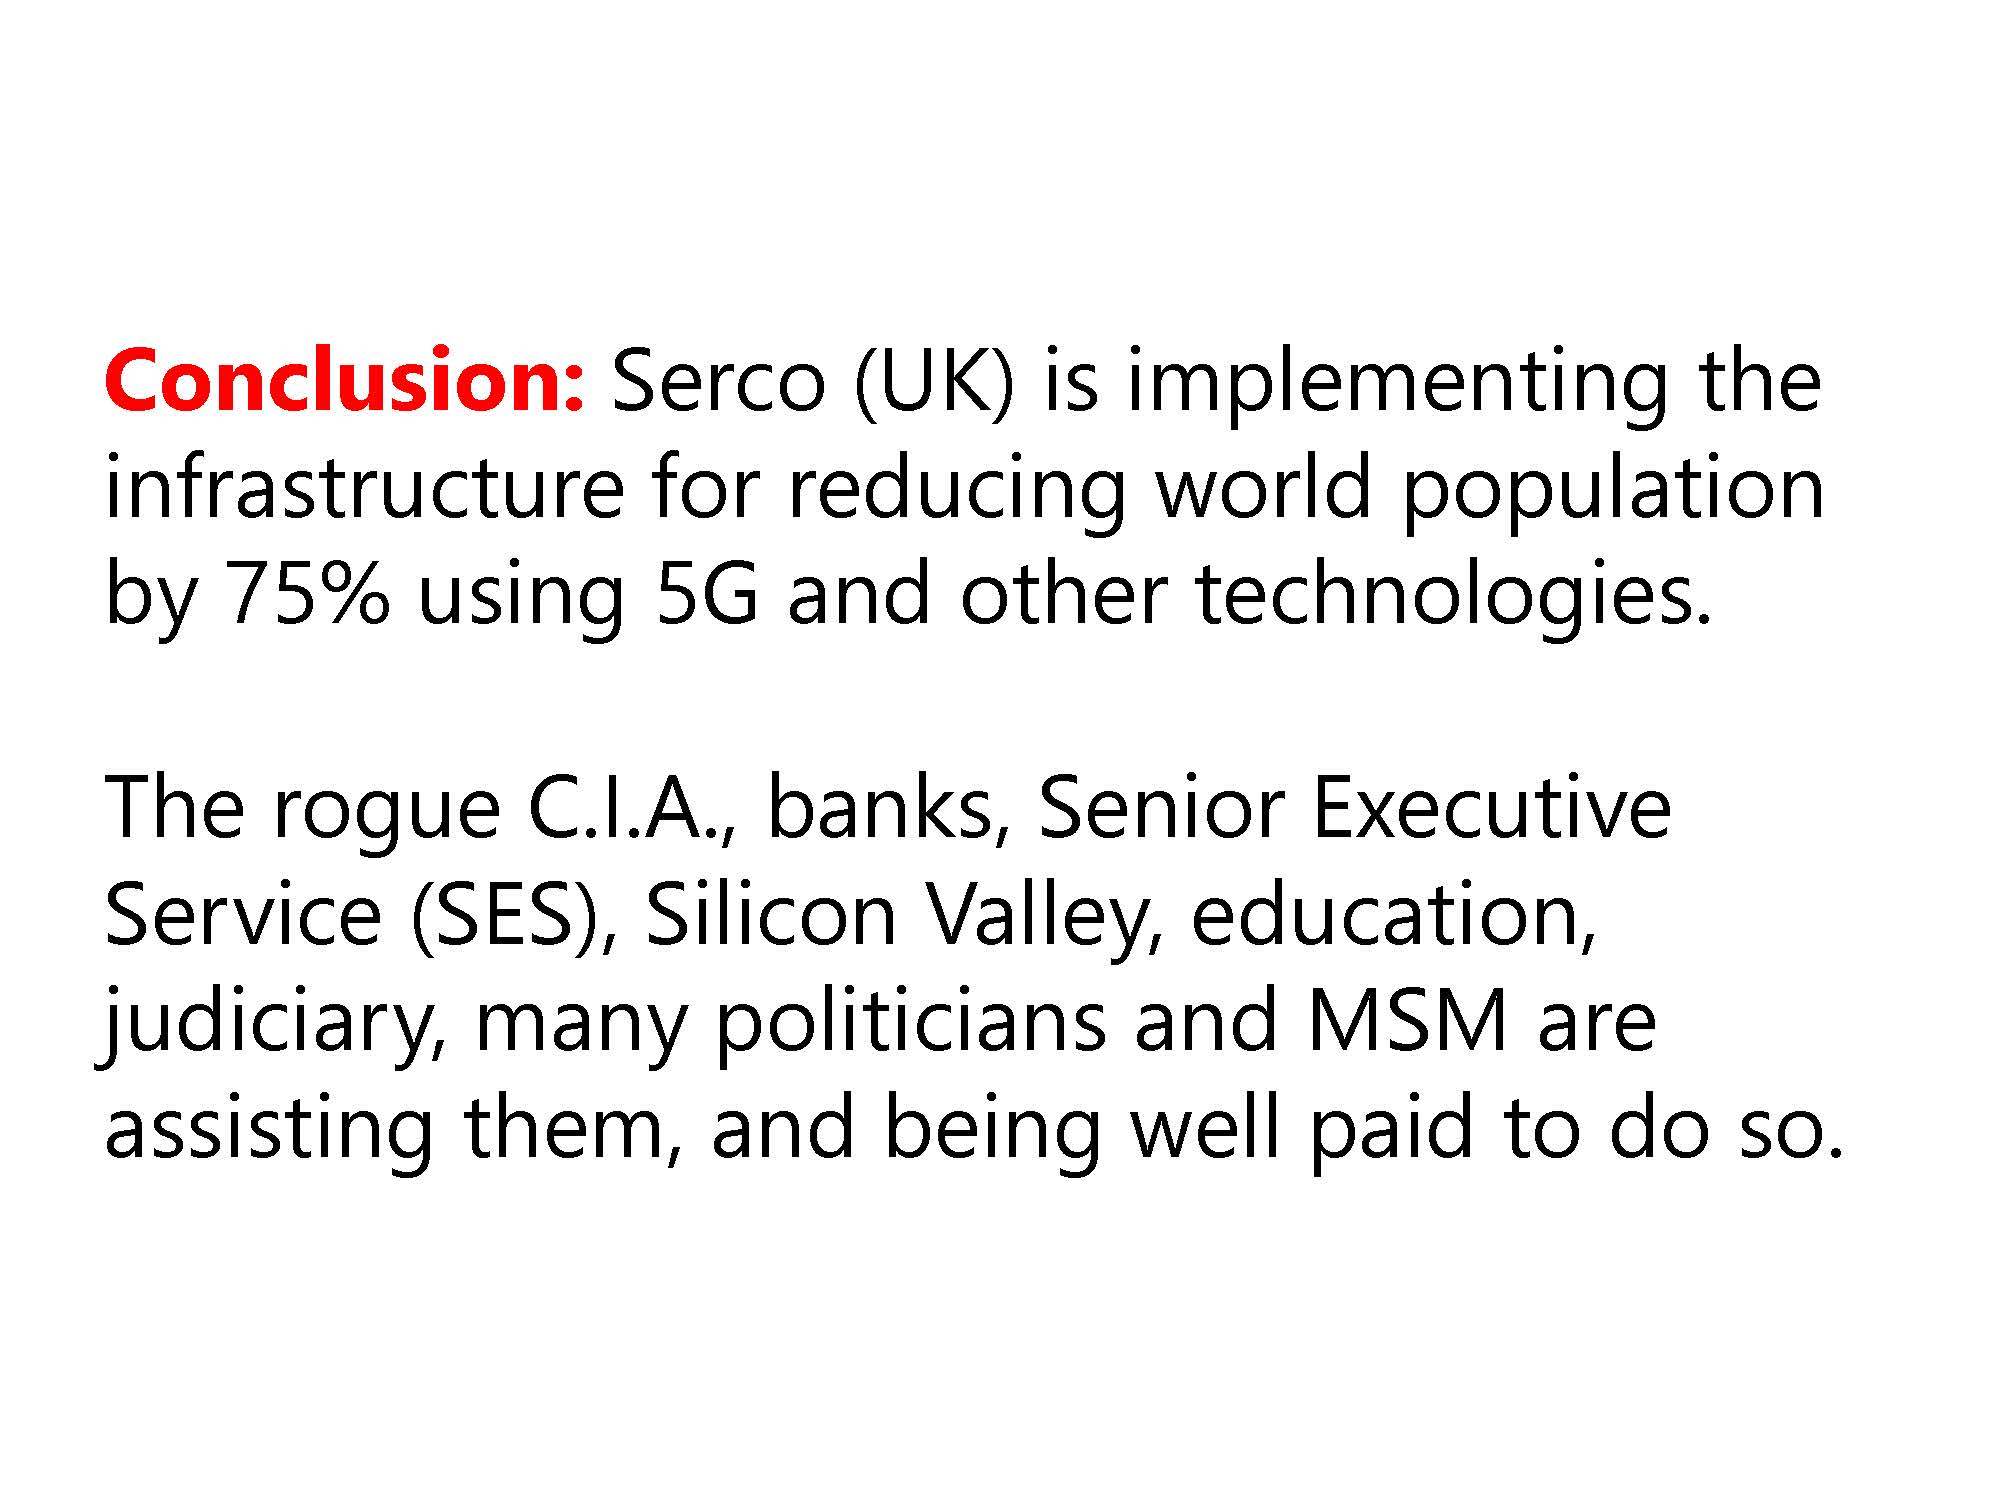 Conclusion: The SES Deep State shadow government eugenics plan has assigned Serco the task of murdering 75% of the world population and then cleaning up the mess.